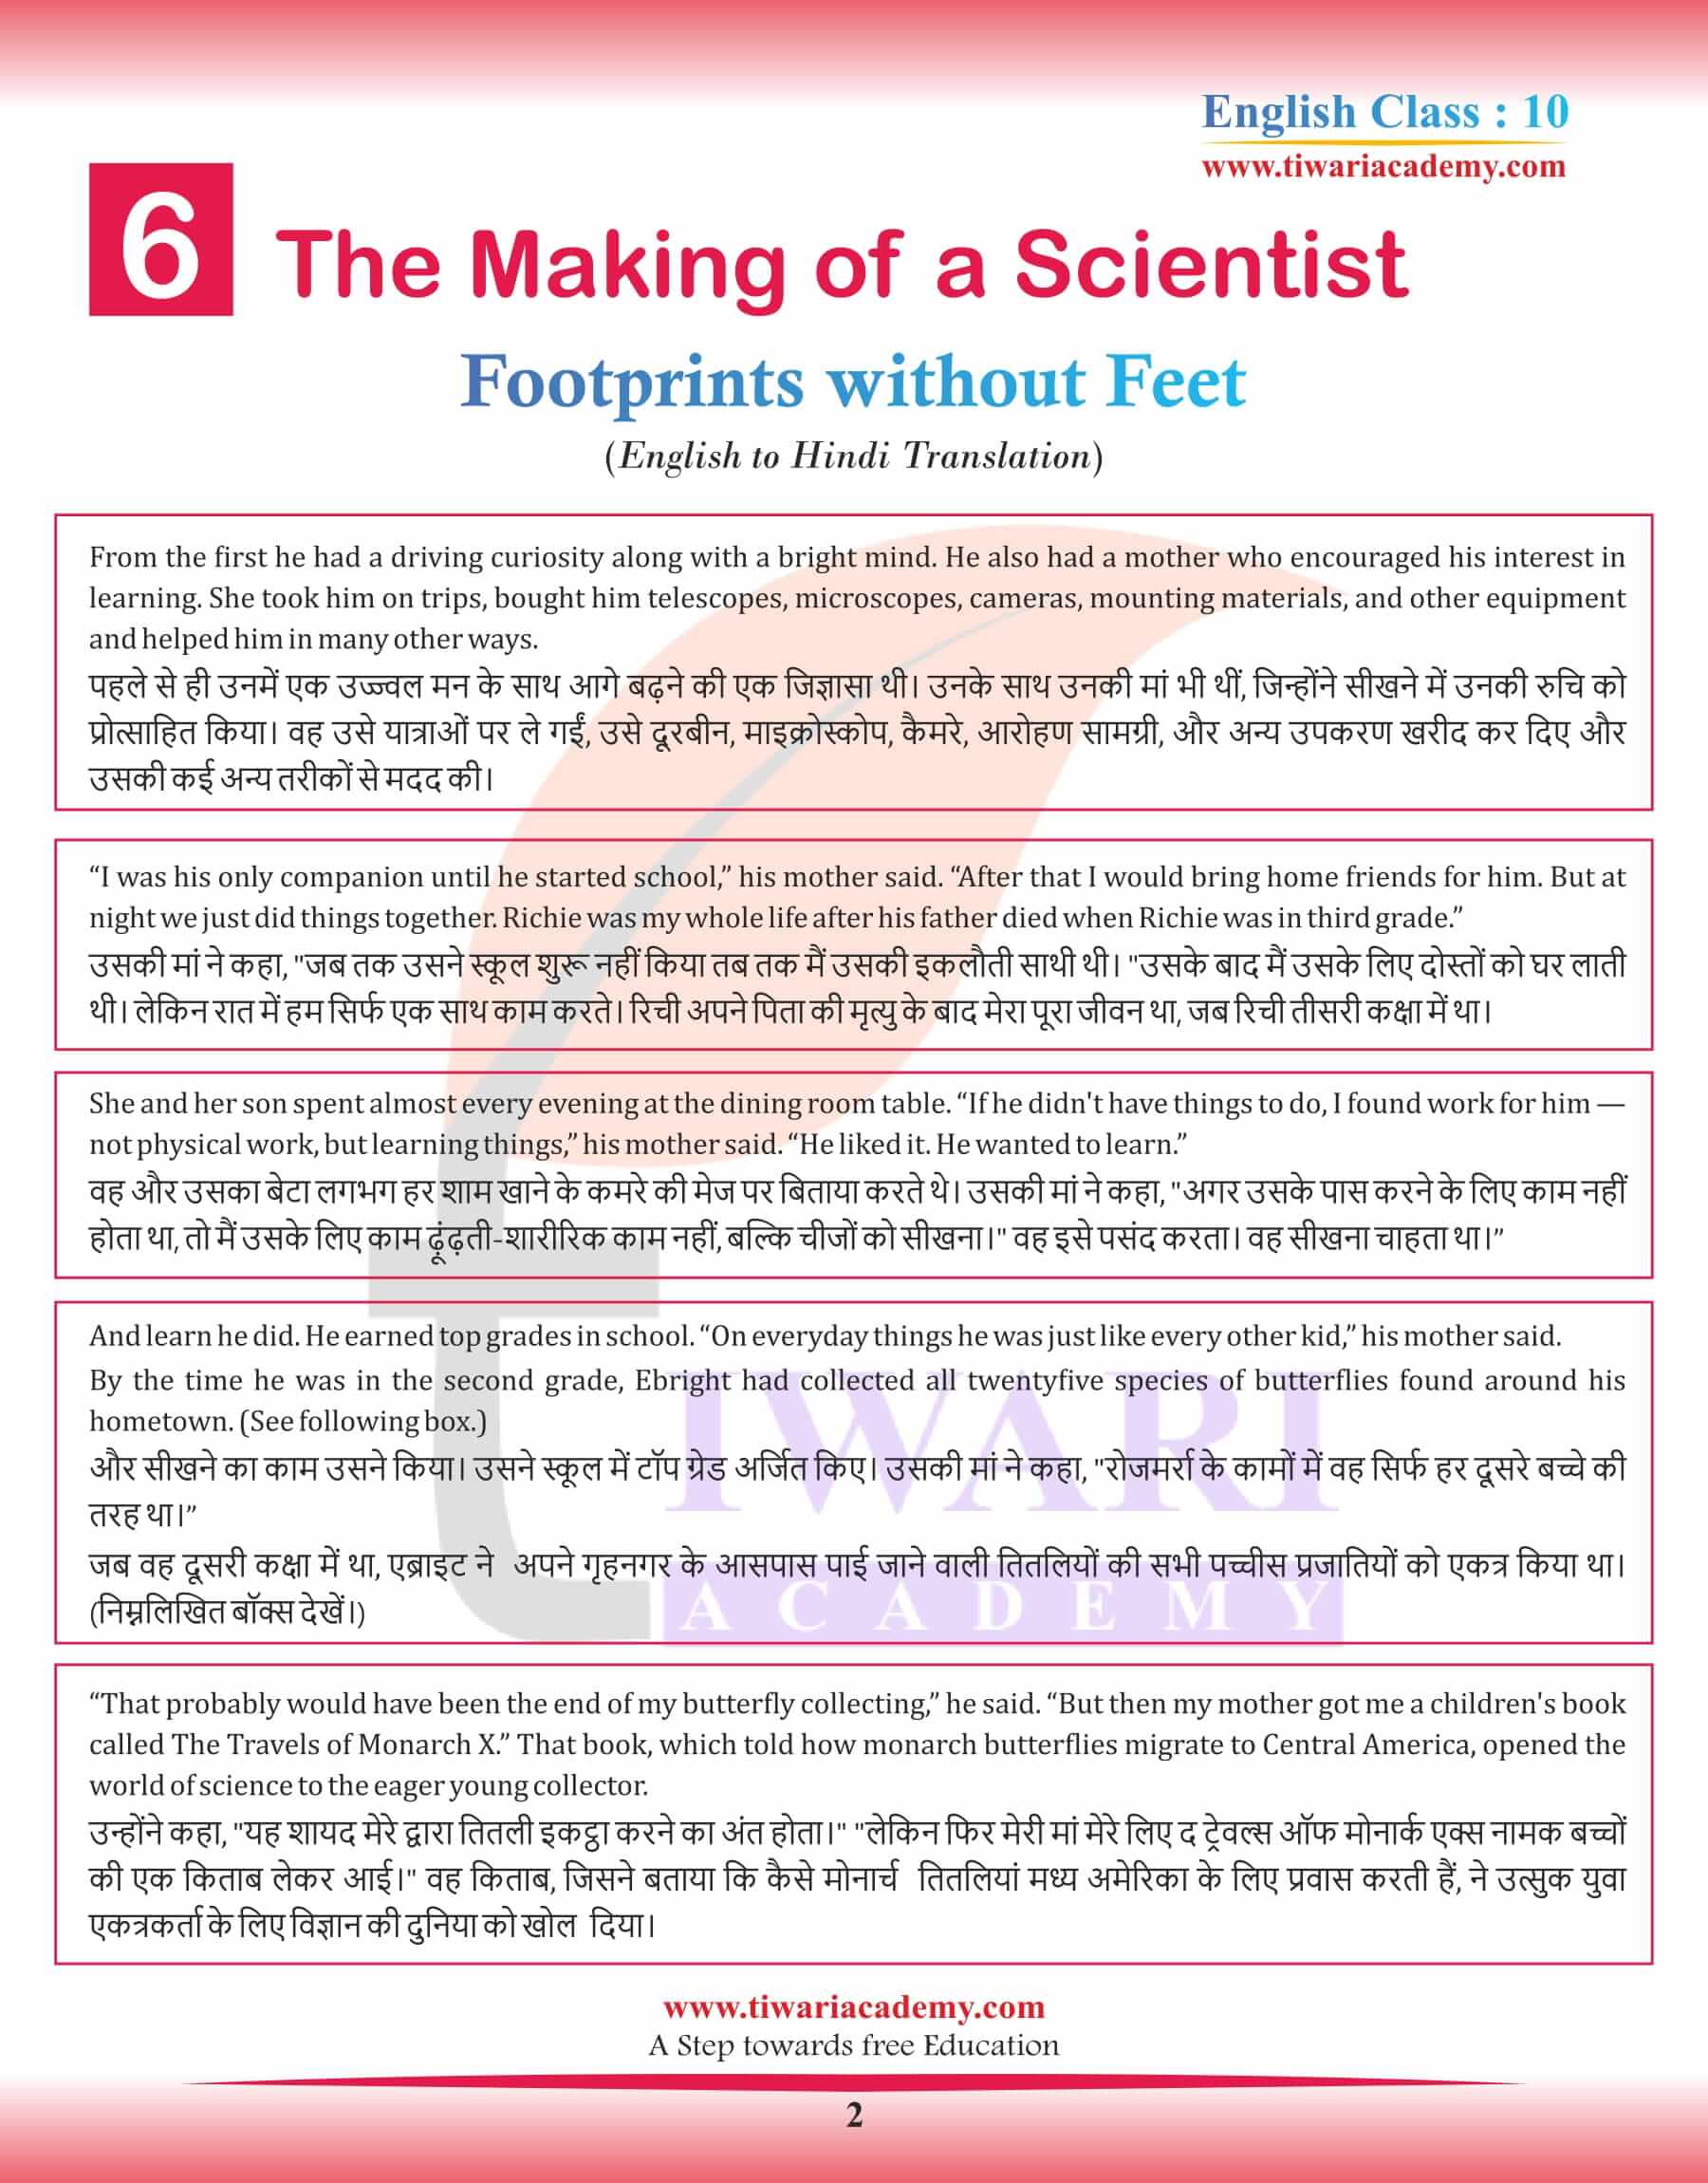 Class 10 English Supplementary Chapter 6 the Making of a Scientist in Hindi